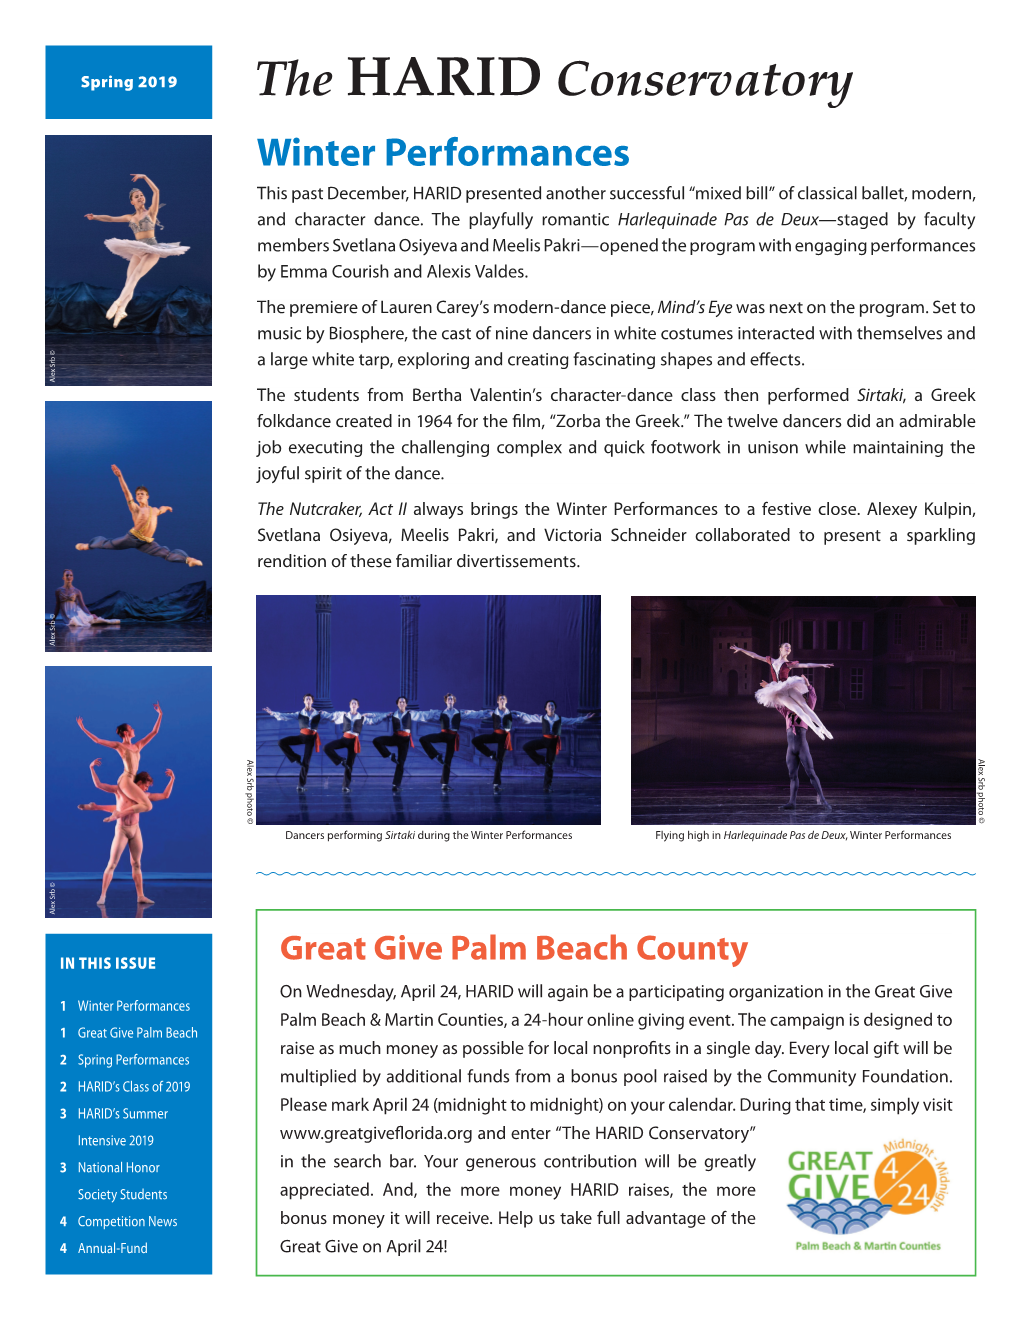 Winter Performances This Past December, HARID Presented Another Successful “Mixed Bill” of Classical Ballet, Modern, and Character Dance